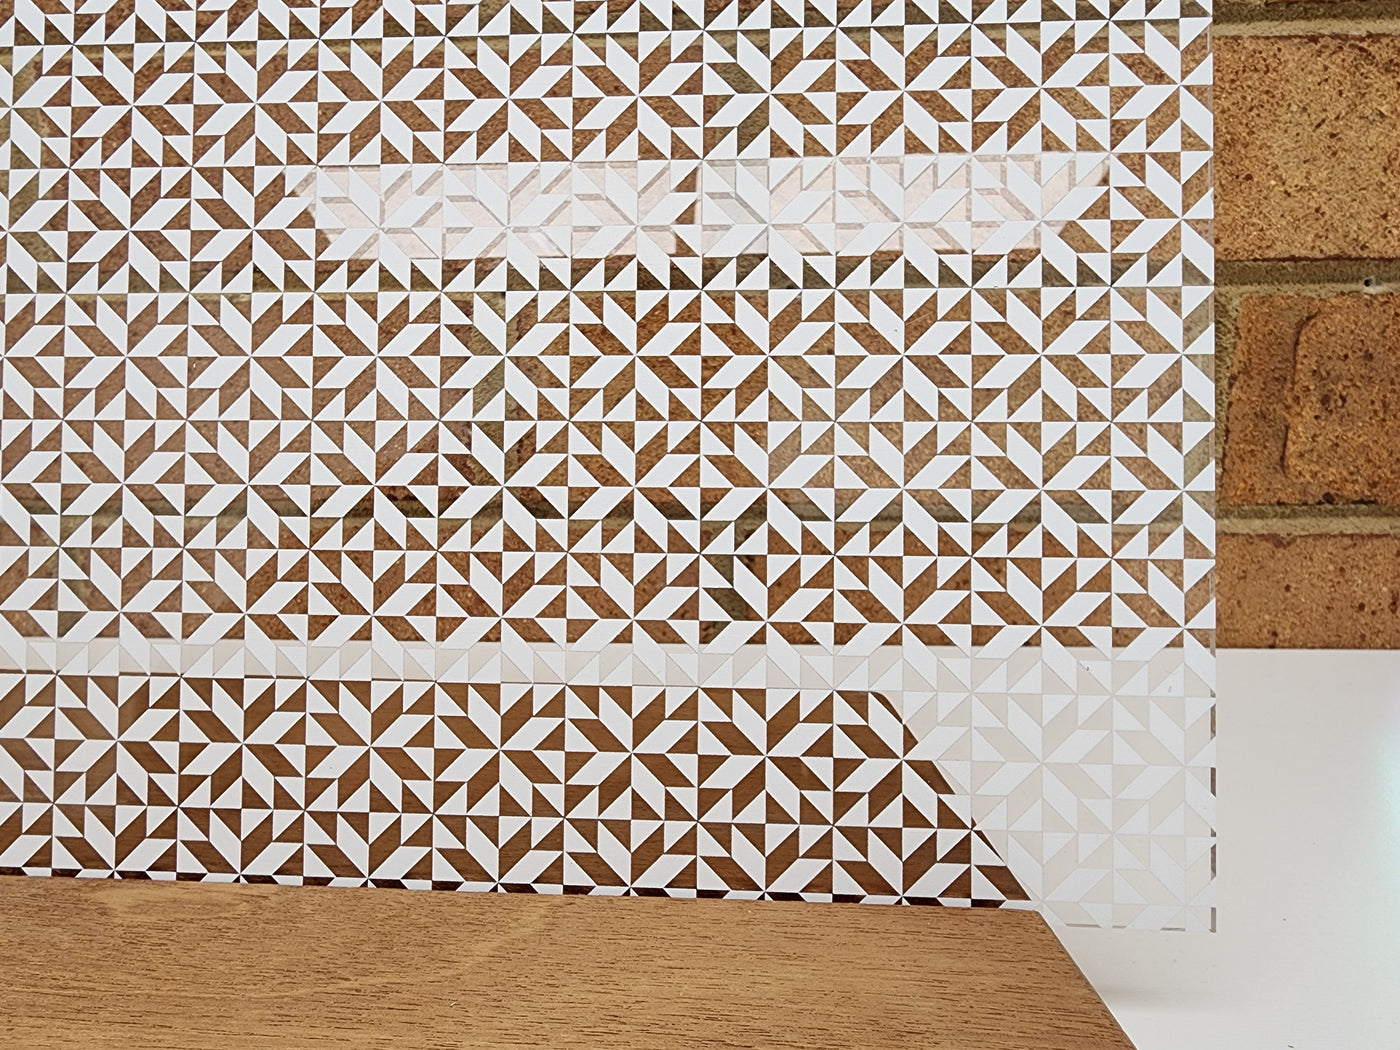 PatternPly® Scattered Quilt WHITE